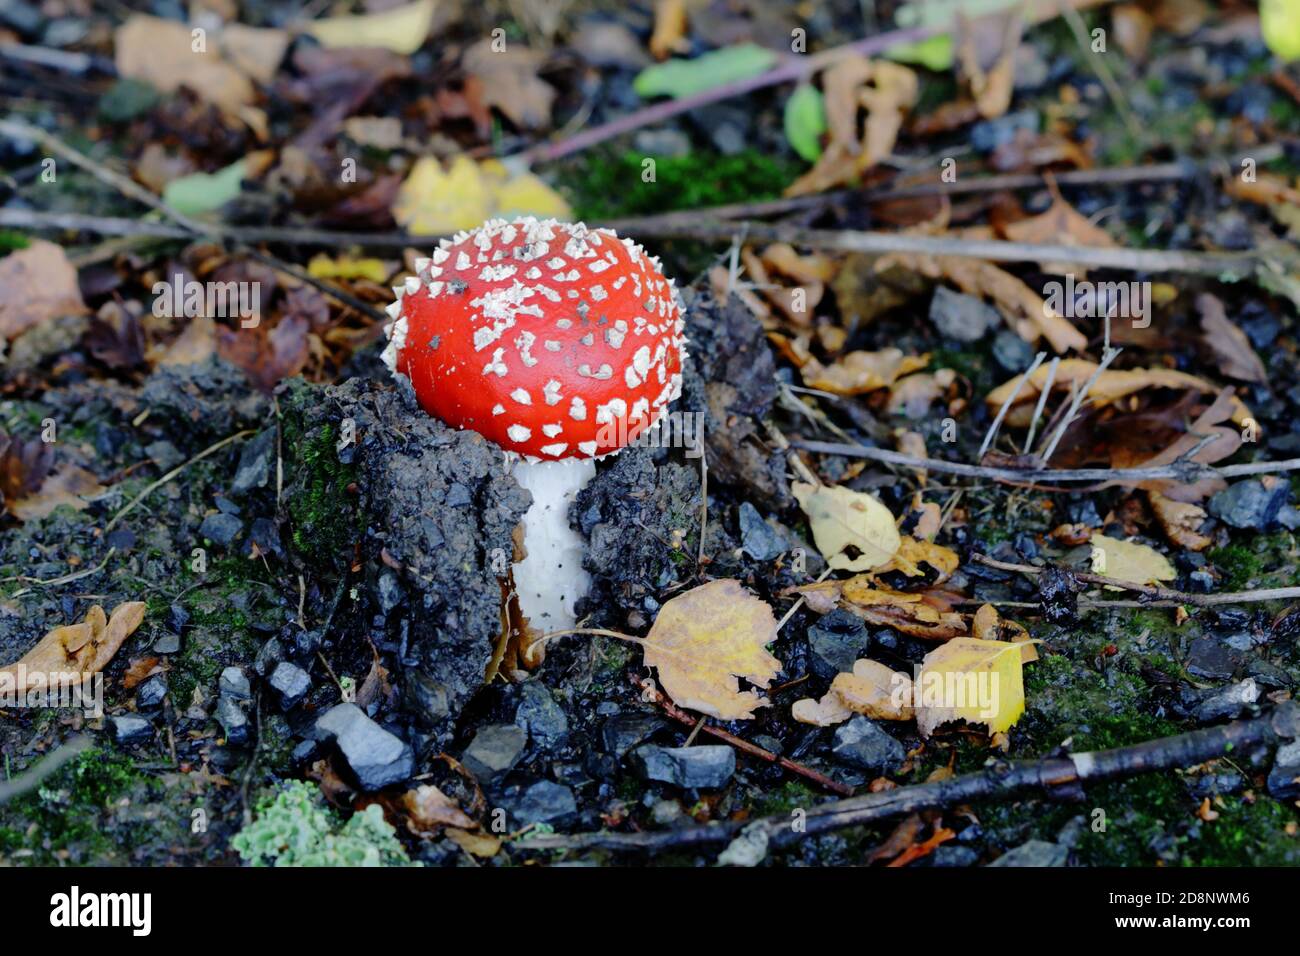 Fly agaric or fly amanita (Amanita muscaria) the red white-spotted mushroom is arguably the most iconic toadstool species Stock Photo